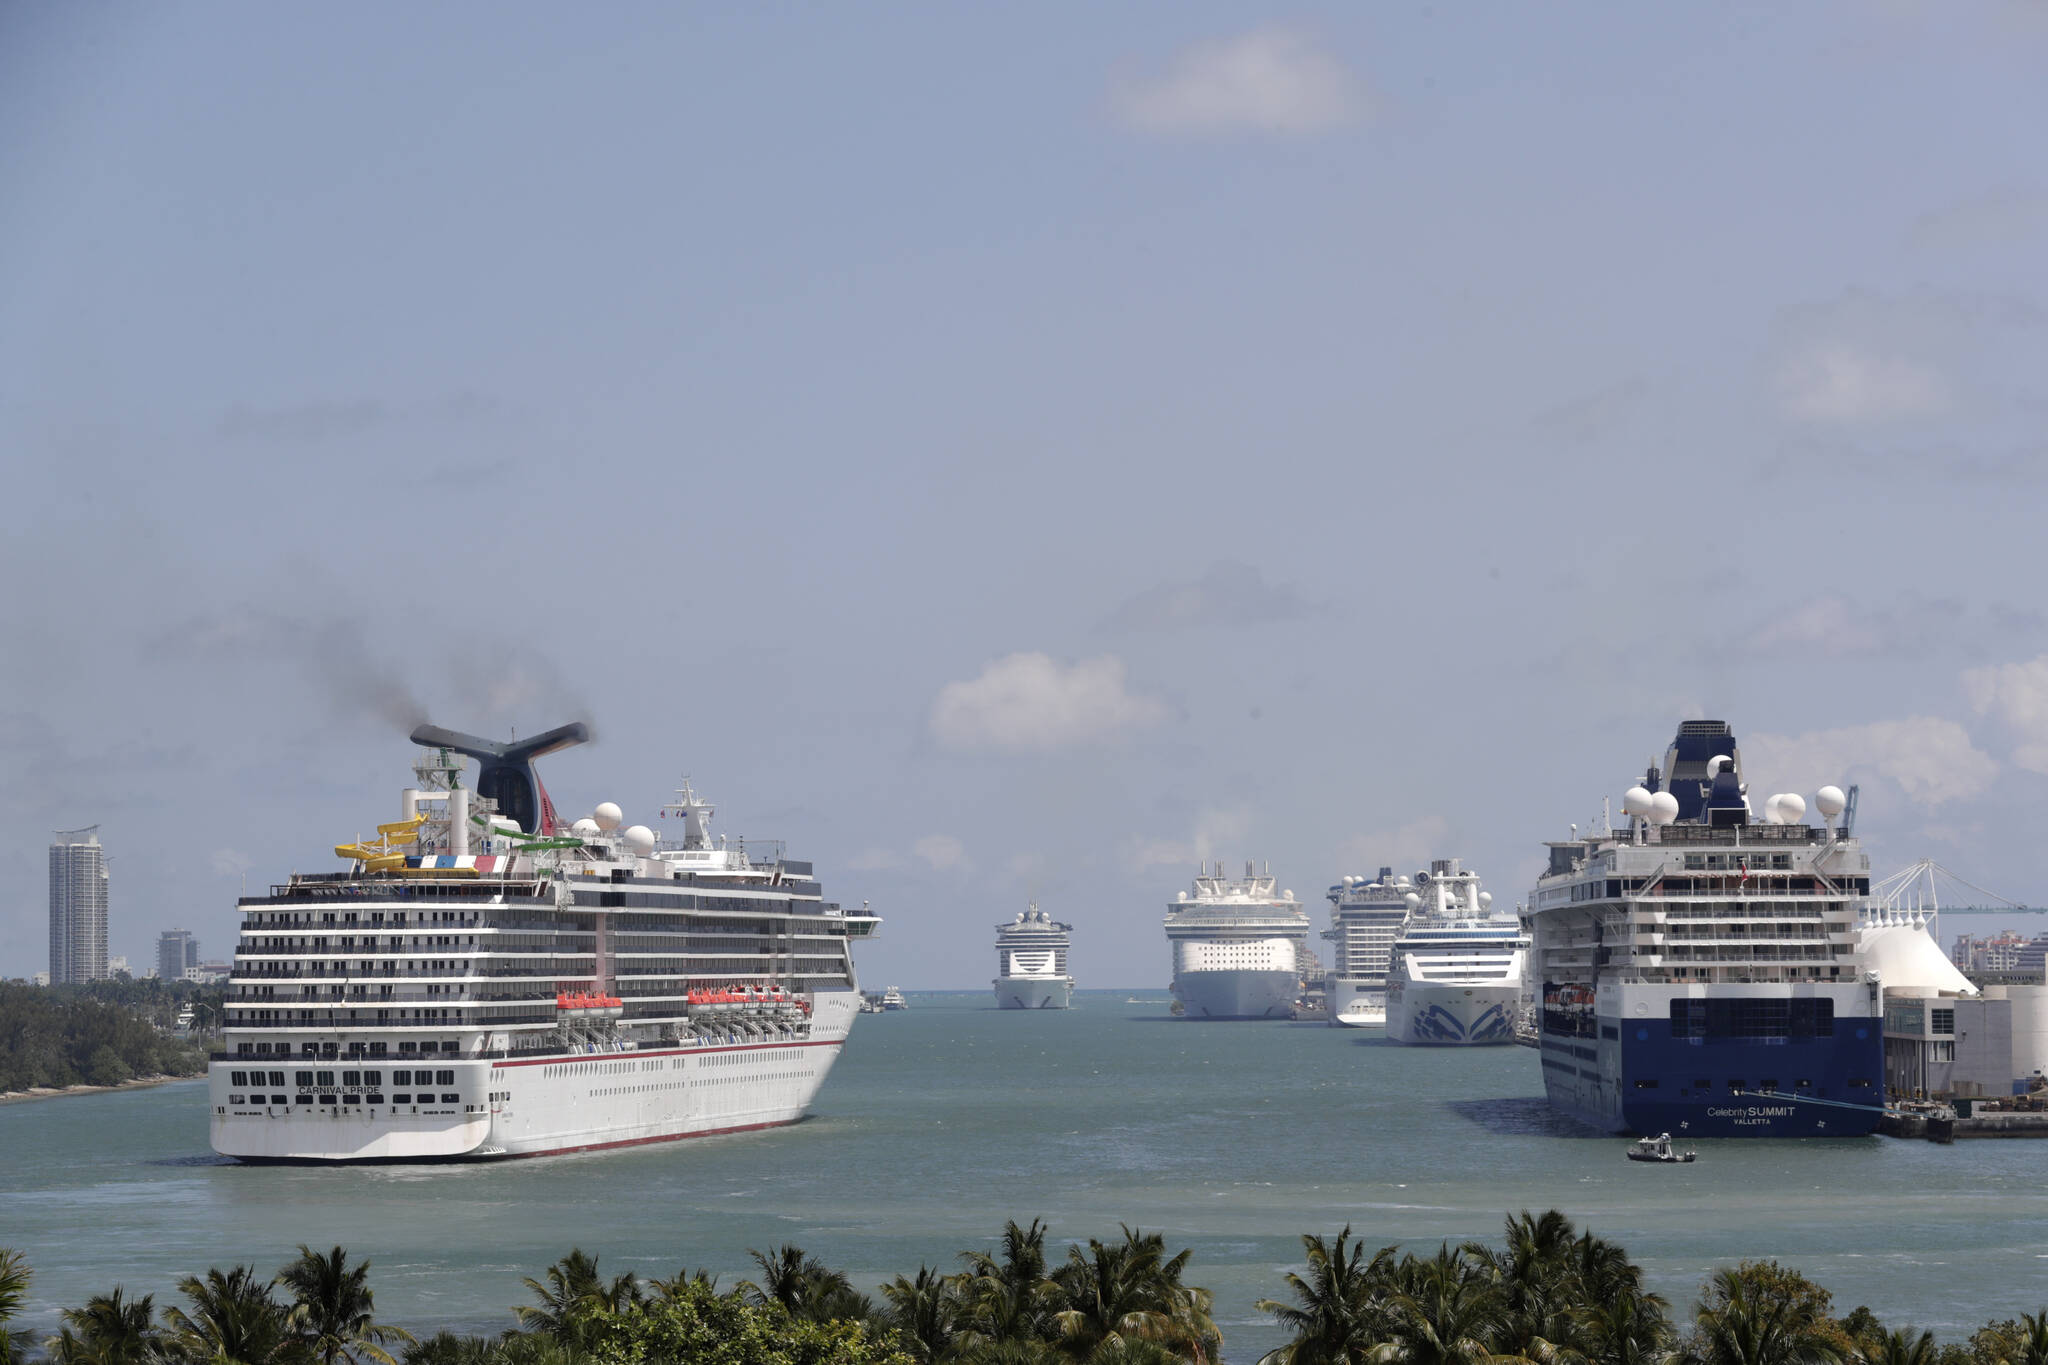 Cruise ships float at PortMiami, on April 7, 2020, in Miami. The U.S. Centers for Disease Control and Prevention is now warning people not to cruise regardless of their vaccination status because of an increase in cases fueled by the omicron variant detected in ships. (AP Photo / Lynne Sladky, File)